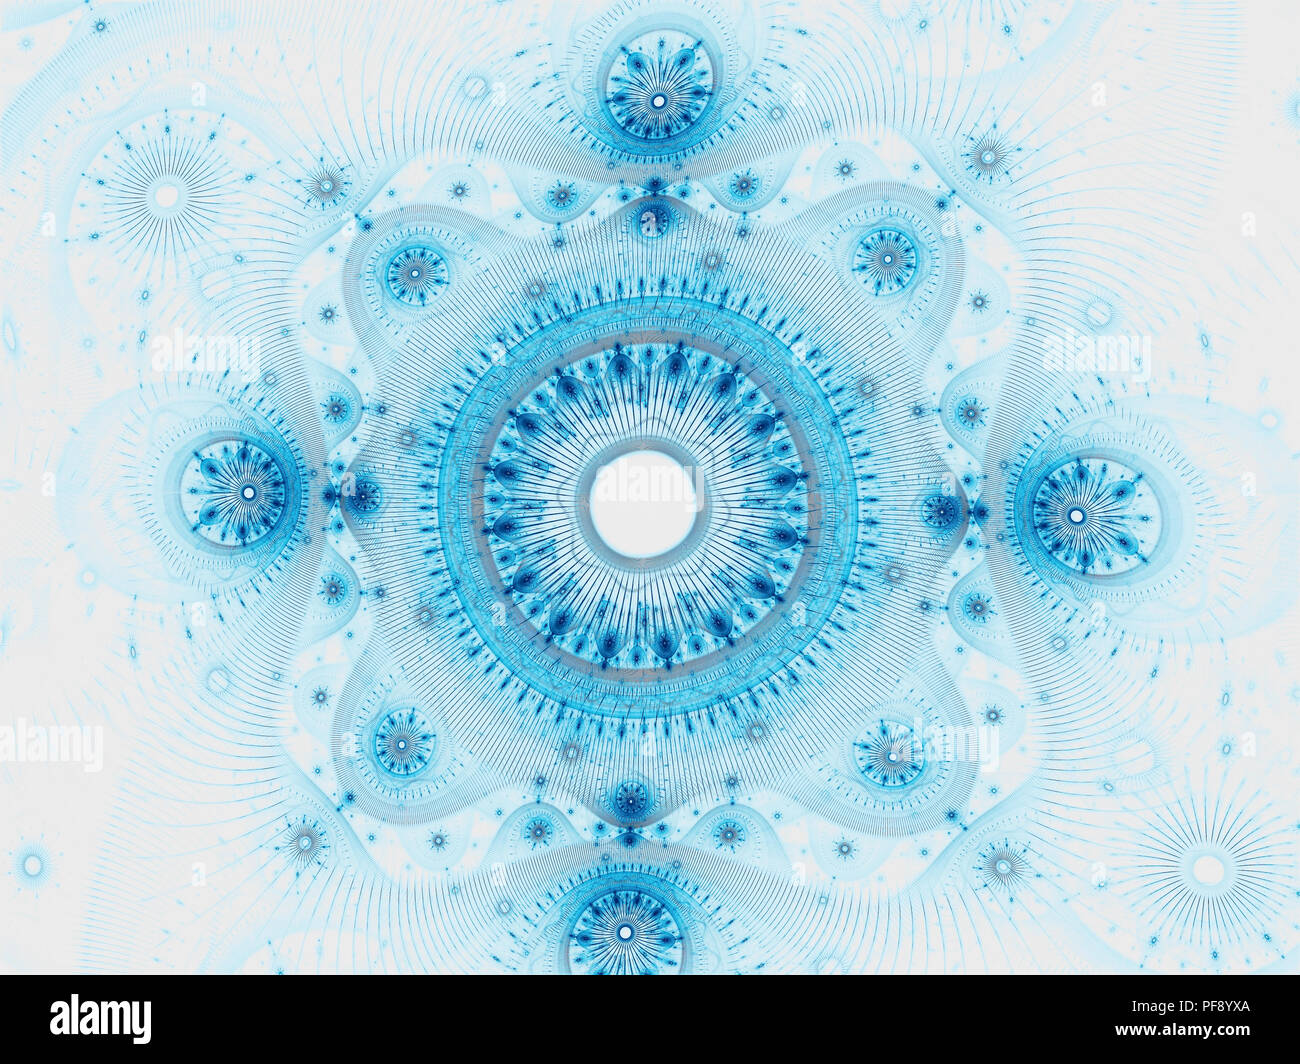 Abstract ornate esoteric background - digitally generated image Stock Photo